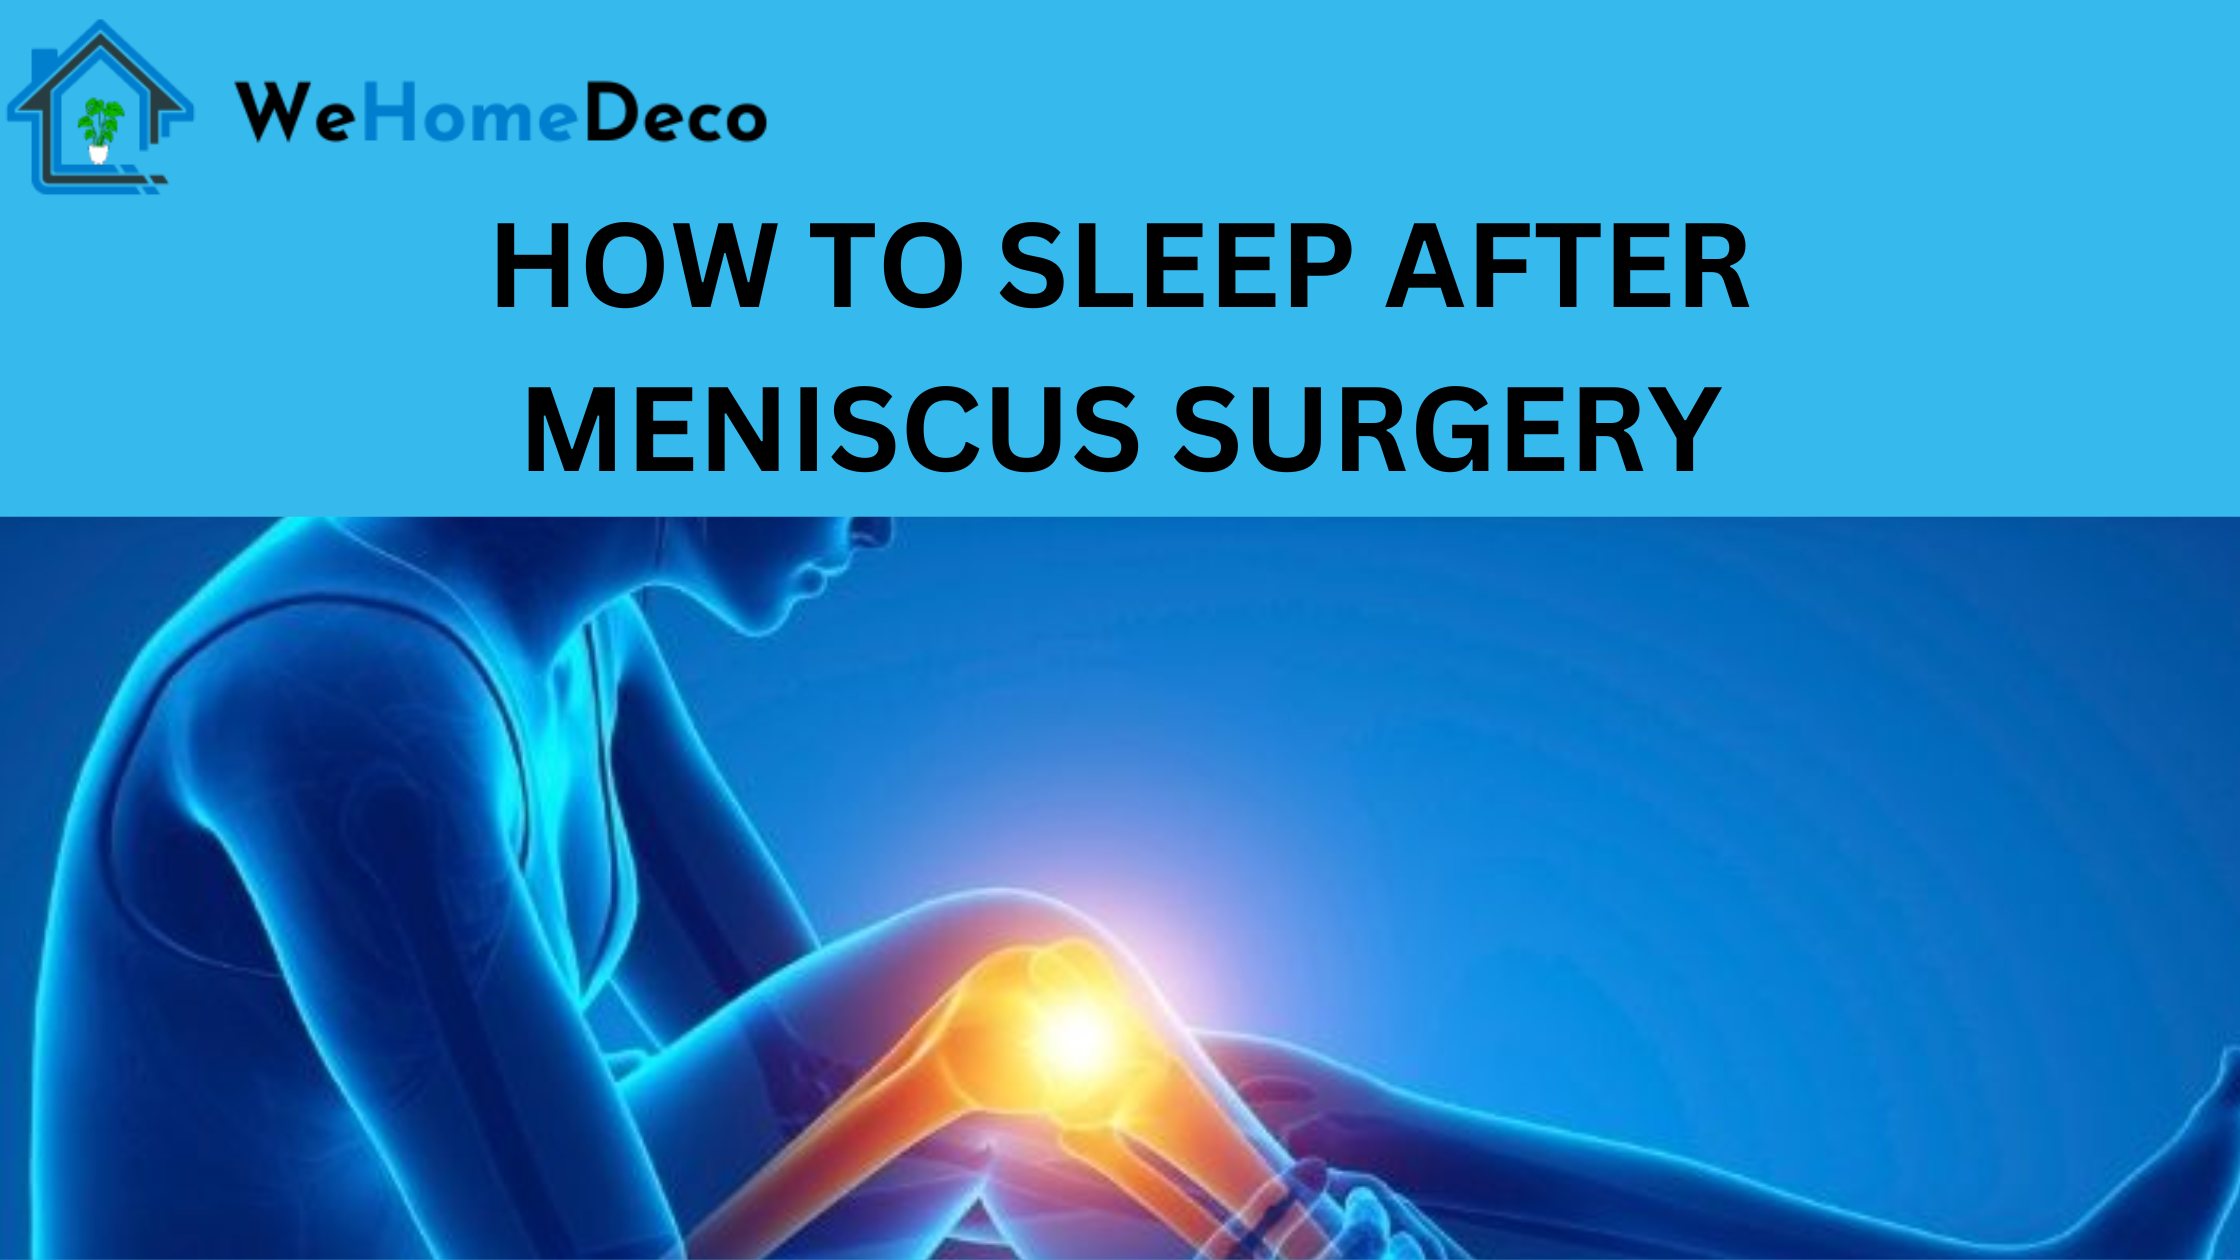 How To Sleep After Meniscus Surgery 4 Proven Tips That Work We Home